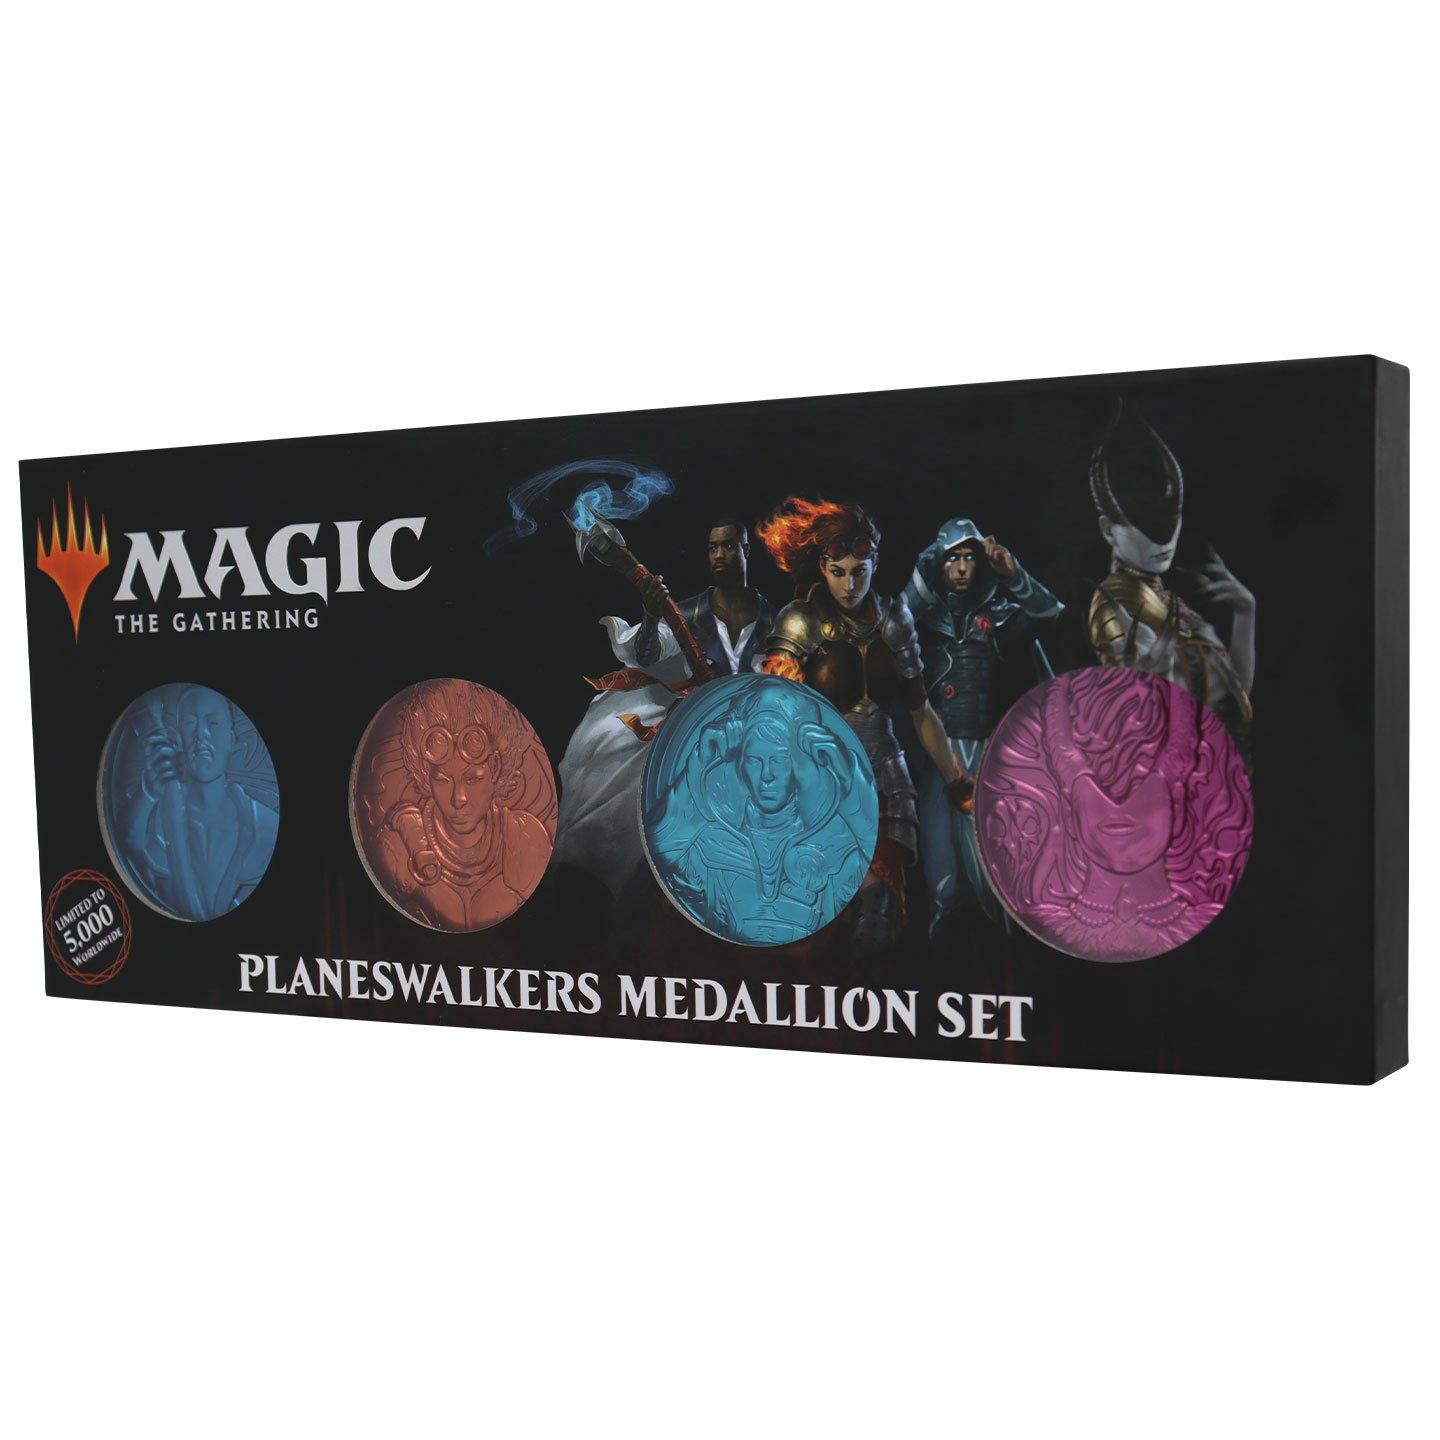 Limited Edition Planeswalkers Medallion Collection